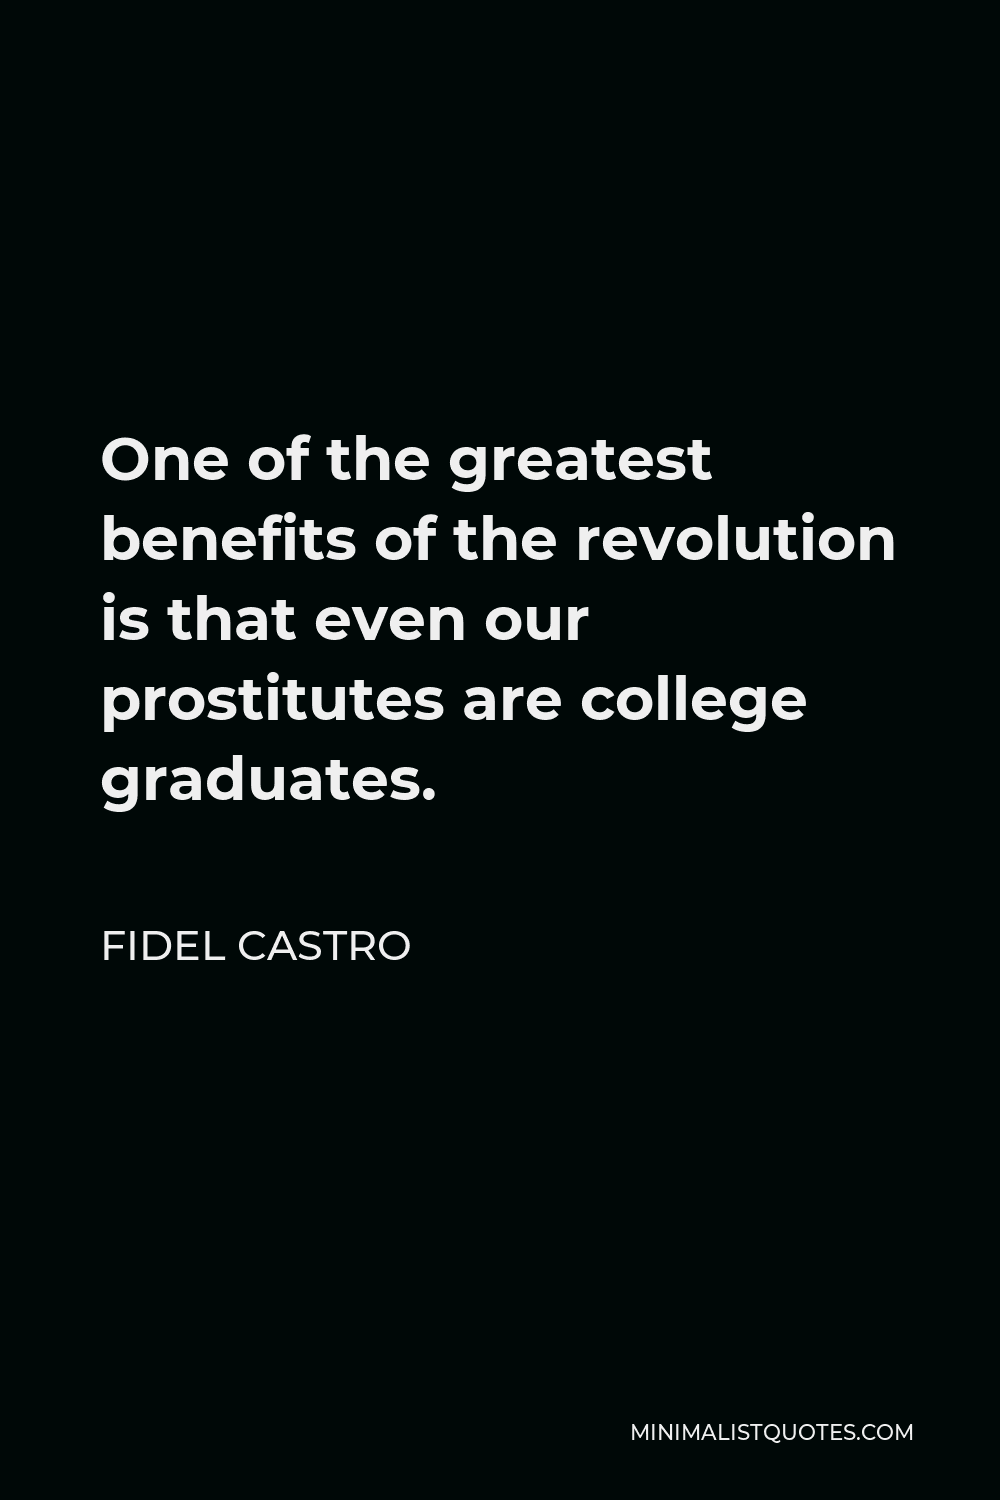 Fidel Castro Quote - One of the greatest benefits of the revolution is that even our prostitutes are college graduates.